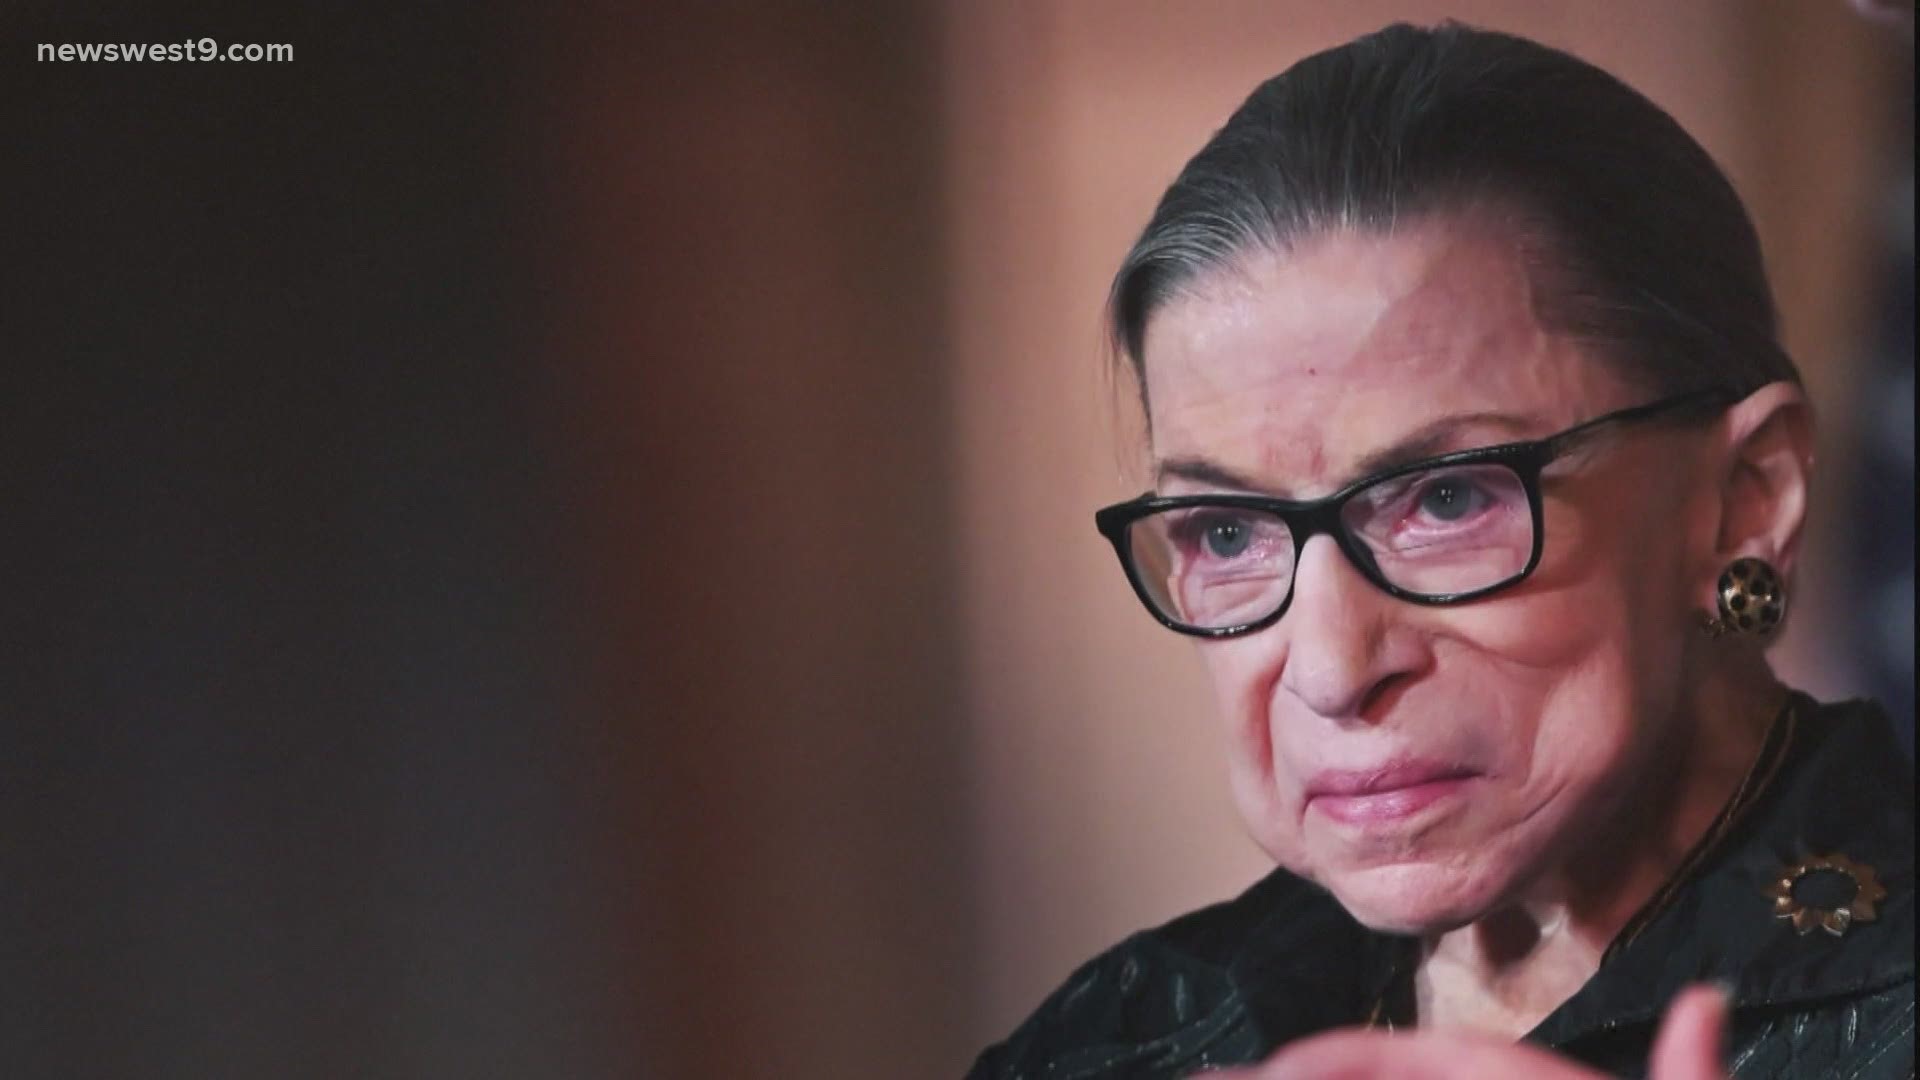 Ruth Bader Ginsburg's body will be the first woman to lie in state at the U.S. Capitol on Friday